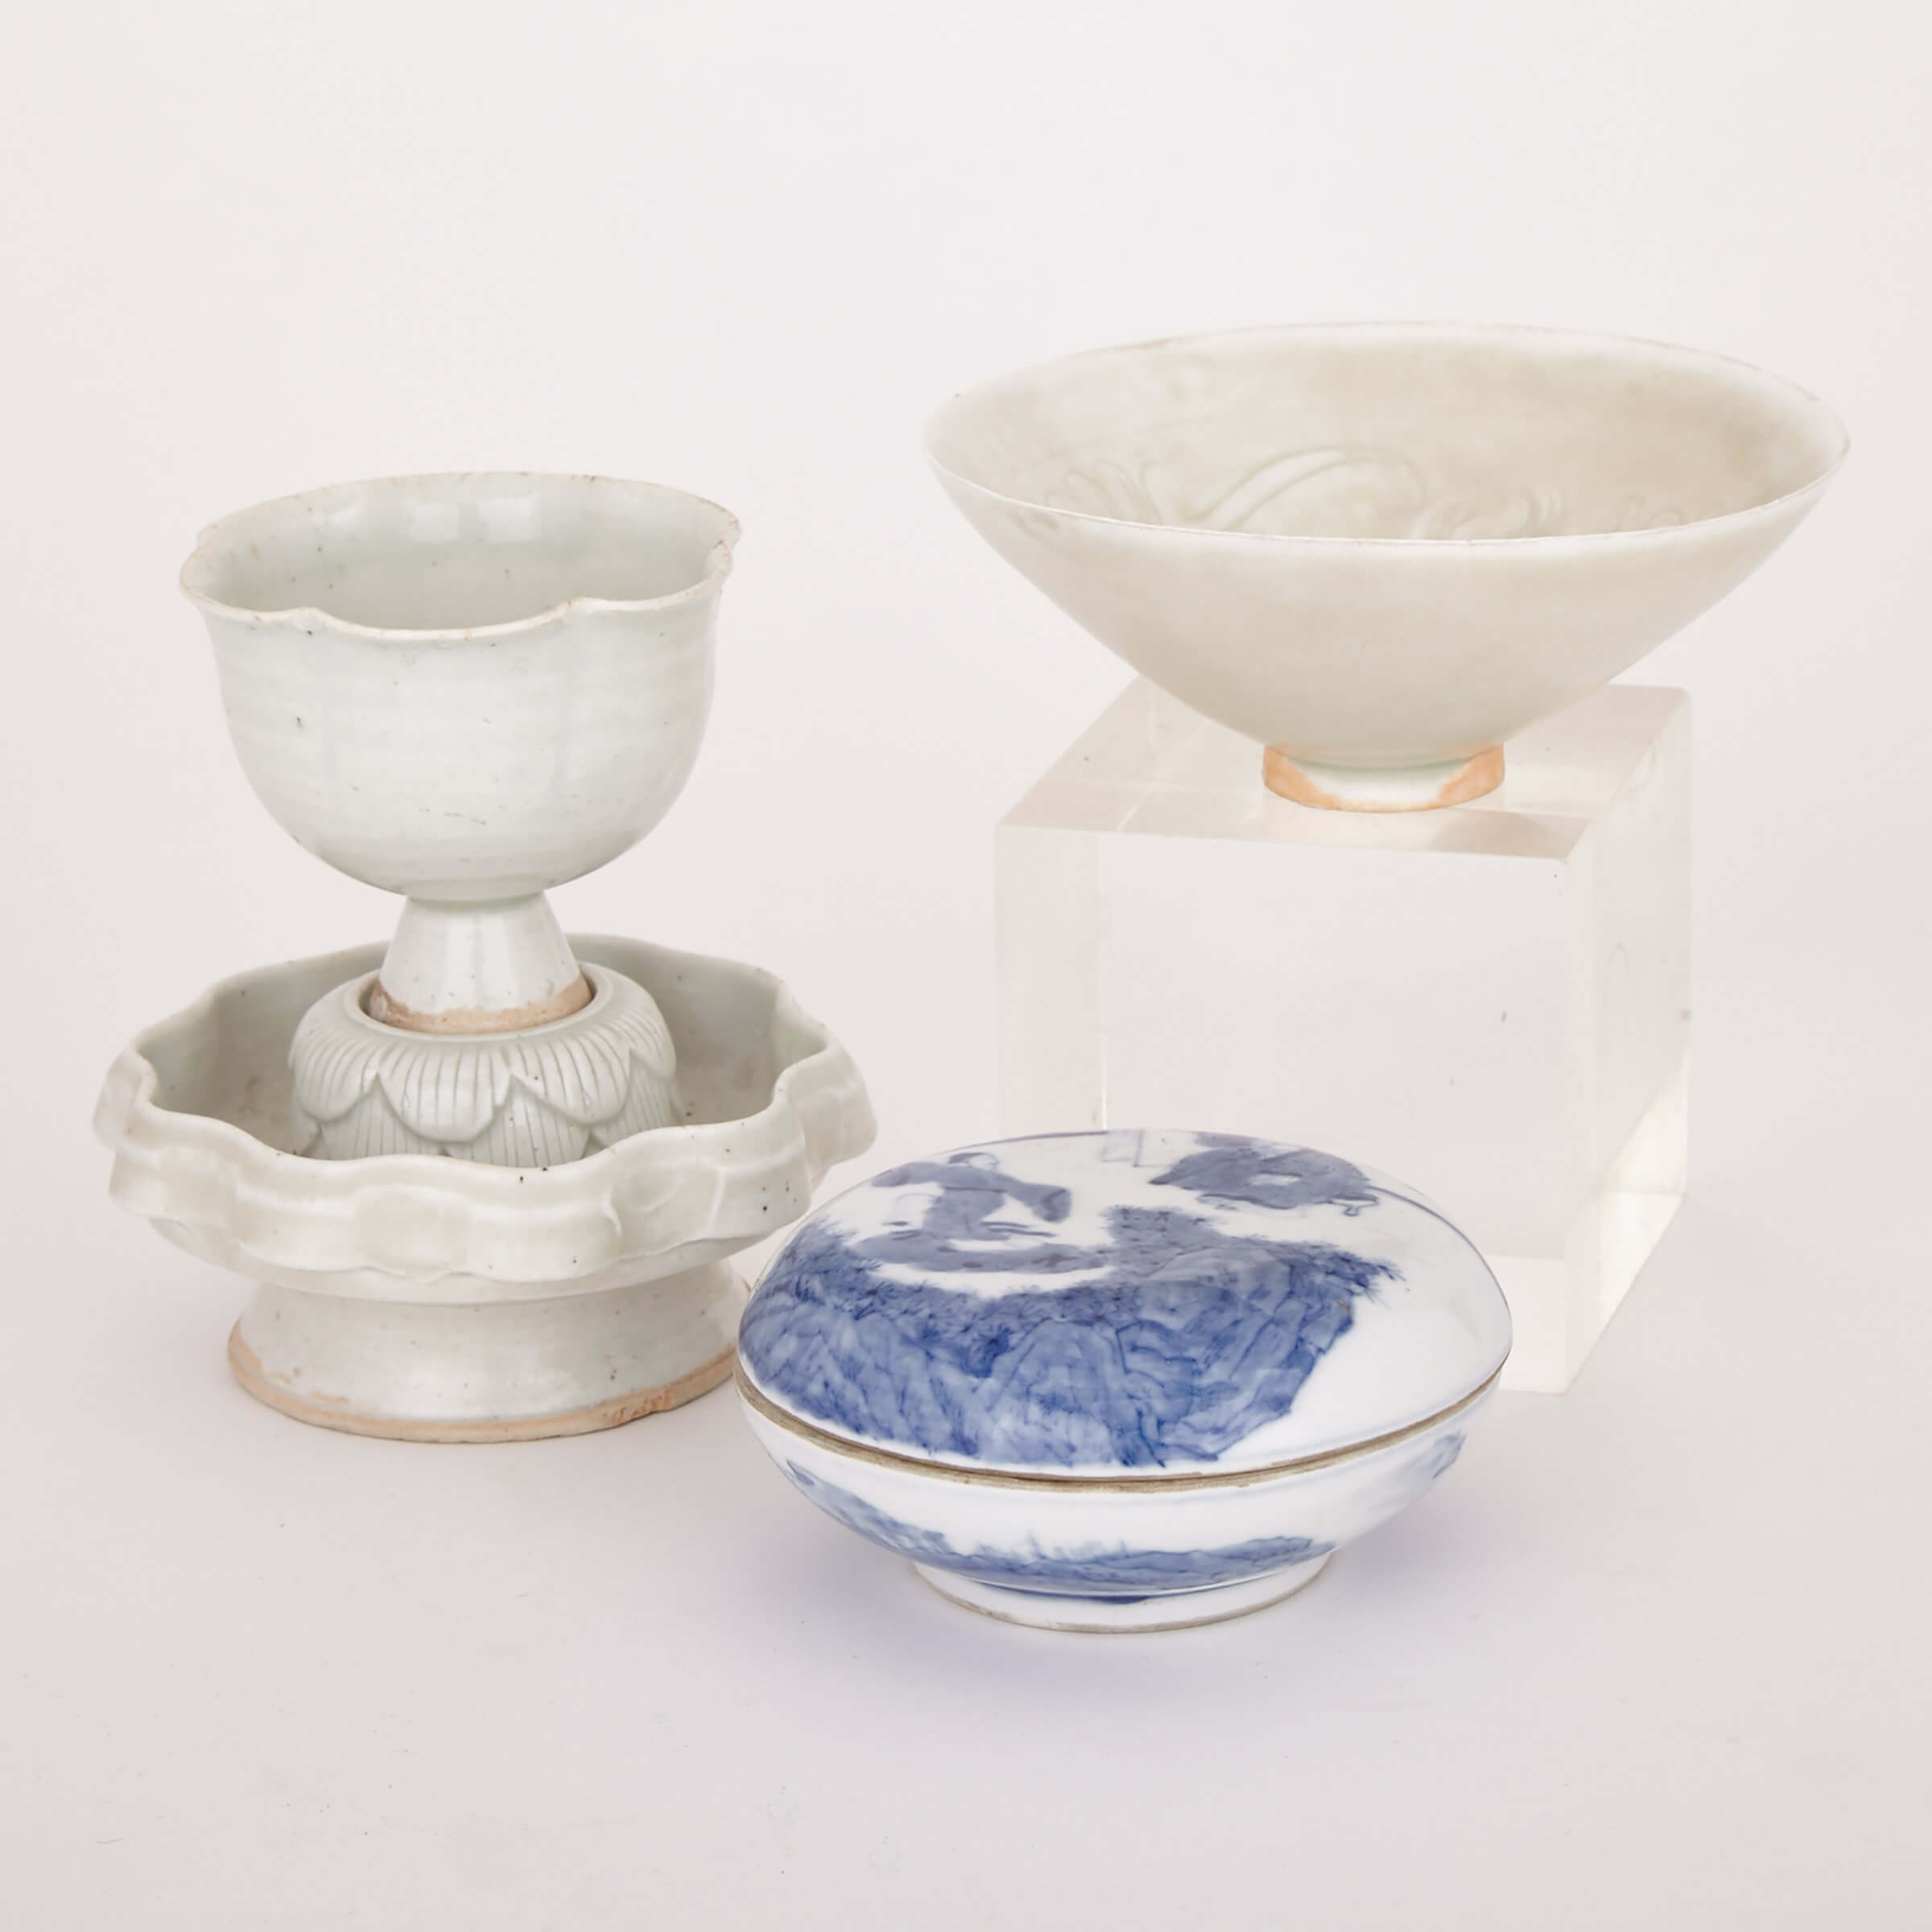 A Group of Three Asian Items, 20th Century